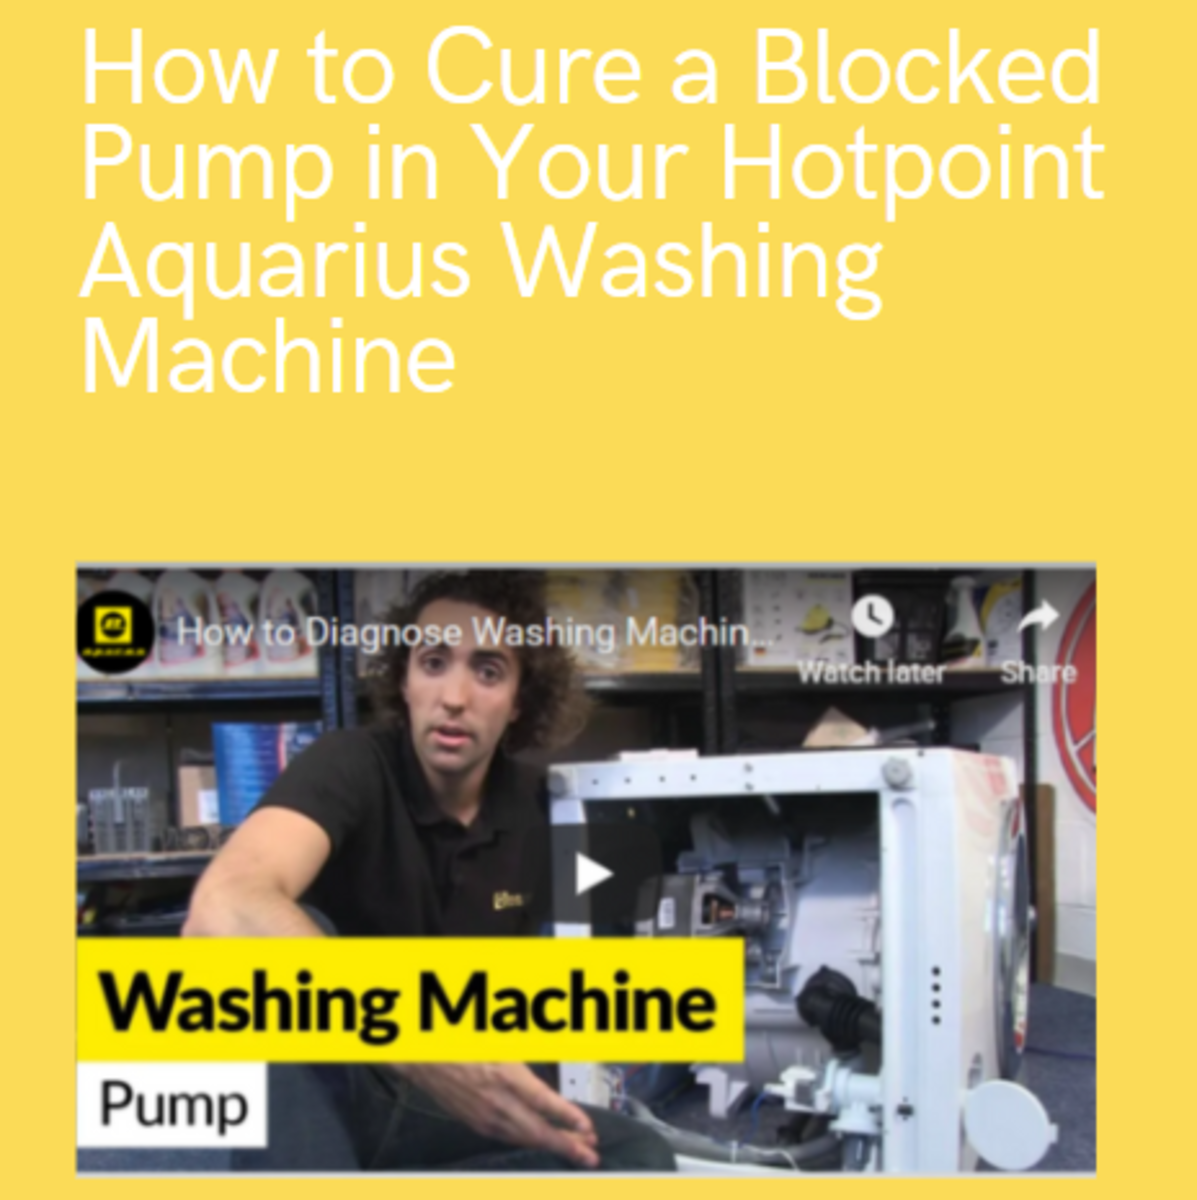 How to Cure a Blocked Pump in Your Hotpoint Aquarius Washing Machine.